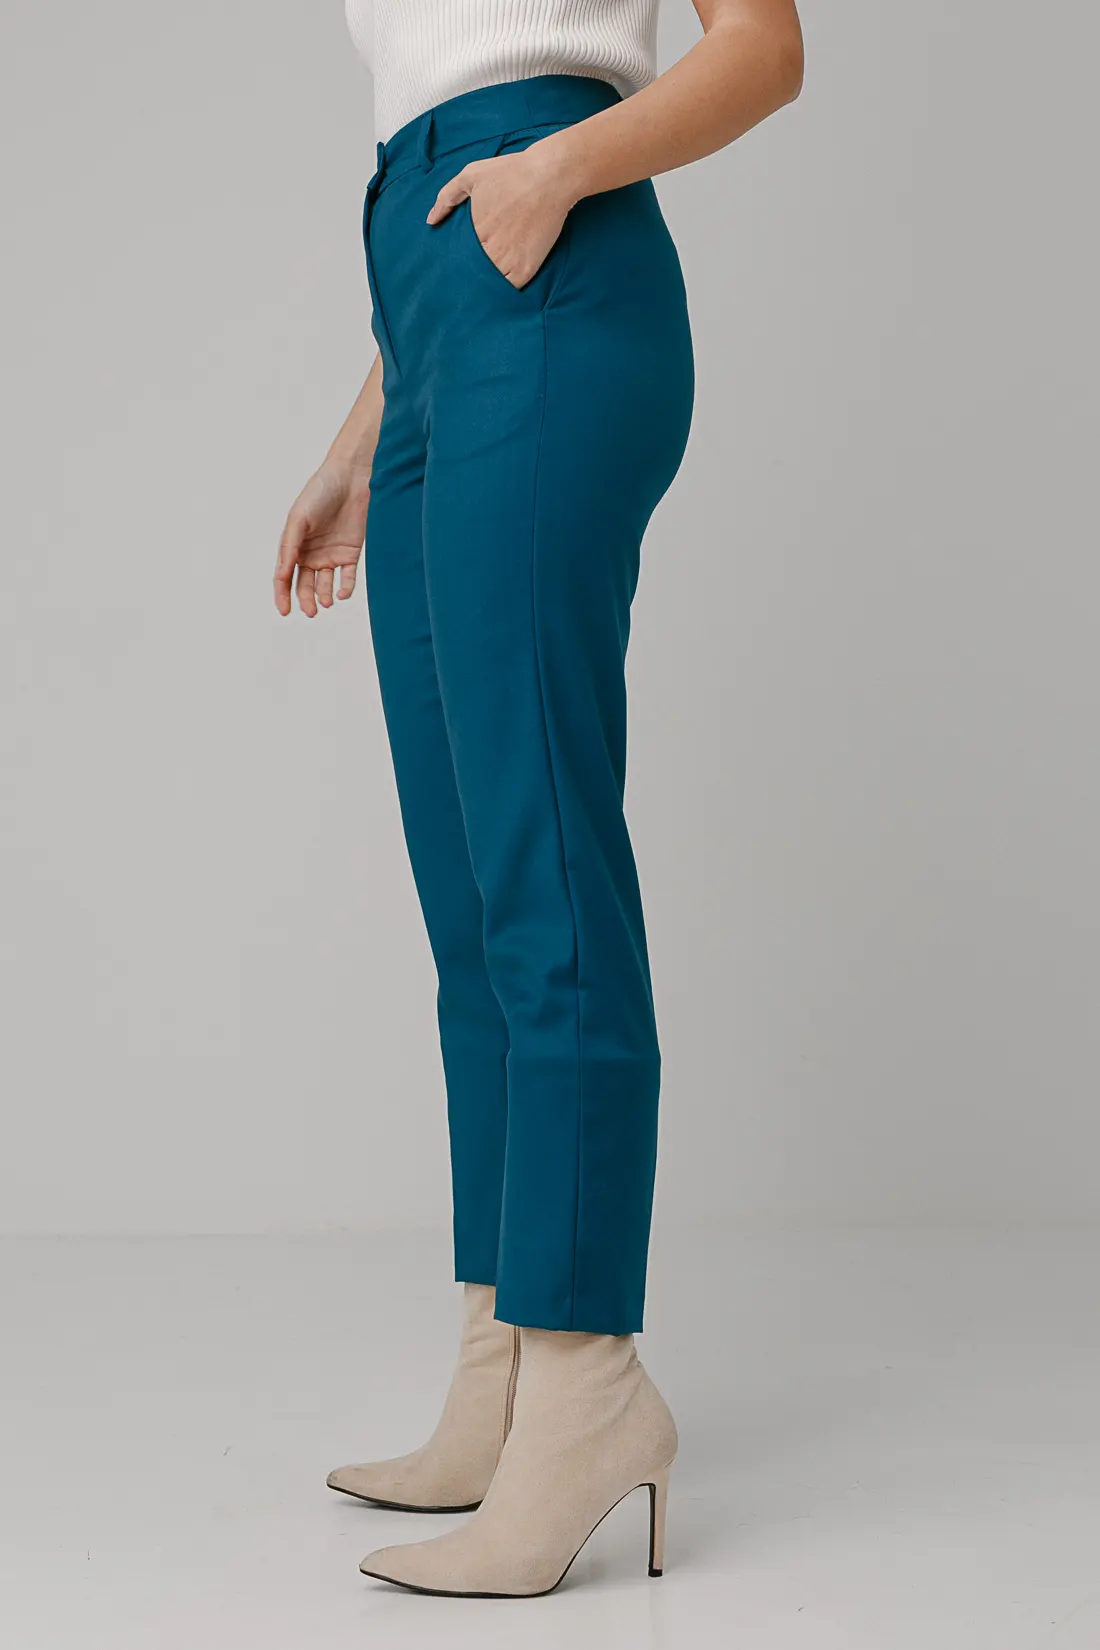 BROOCH TROUSERS - TURQUOISE